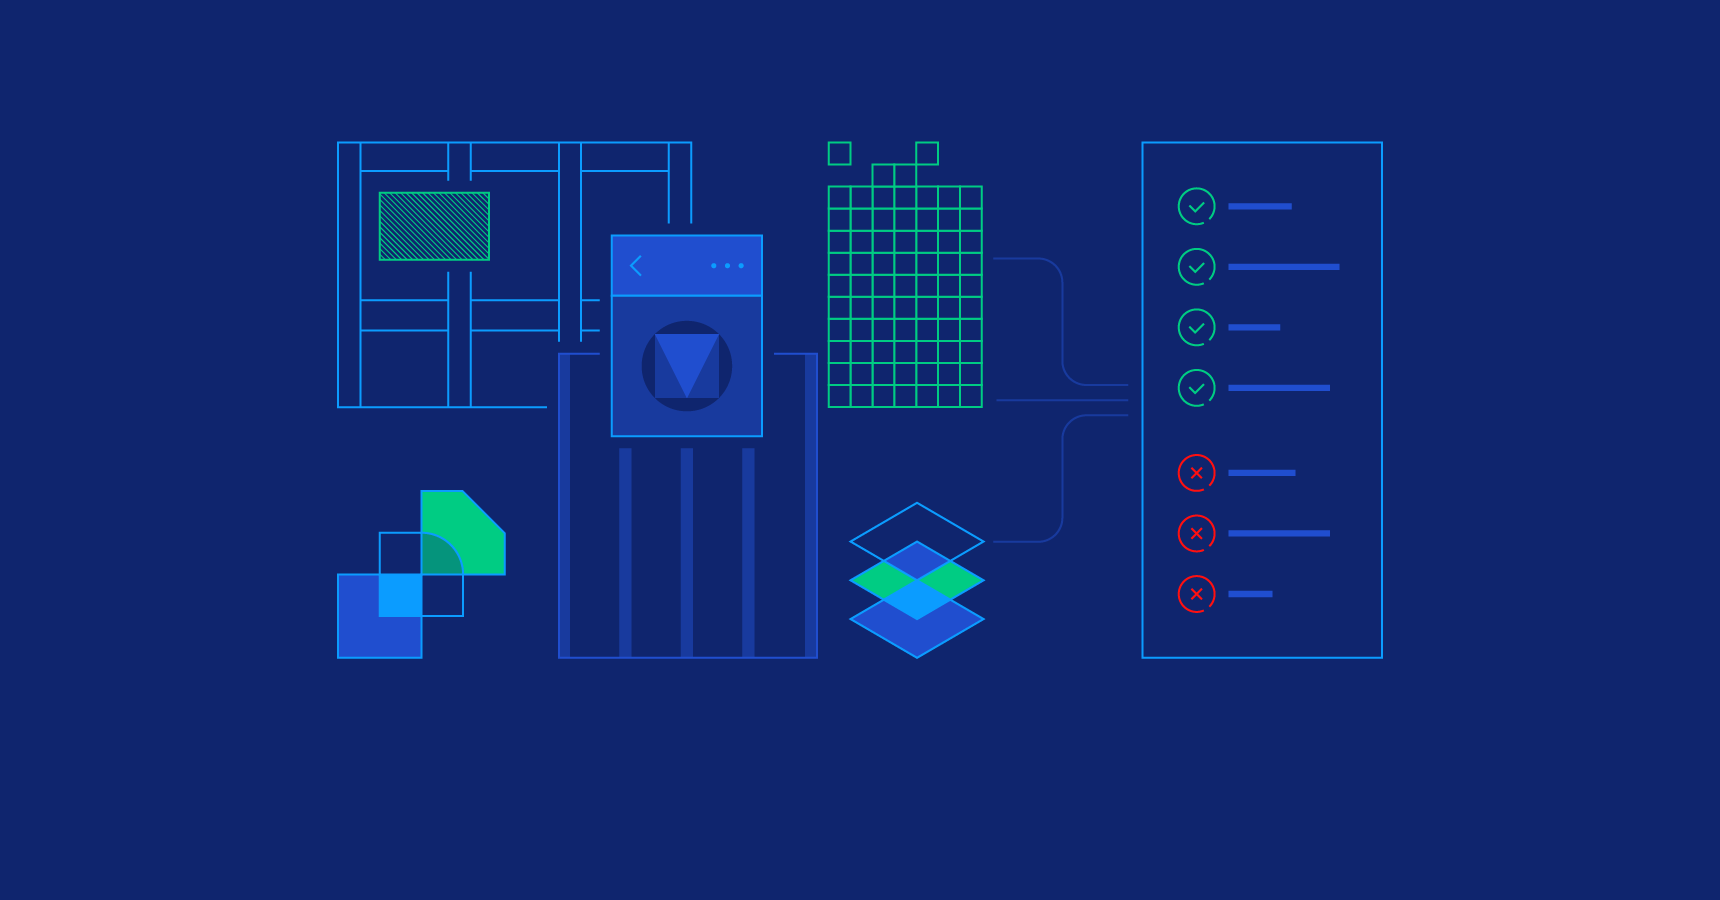 Why Use Material Design? Weighing the Pros and Cons | Toptal®